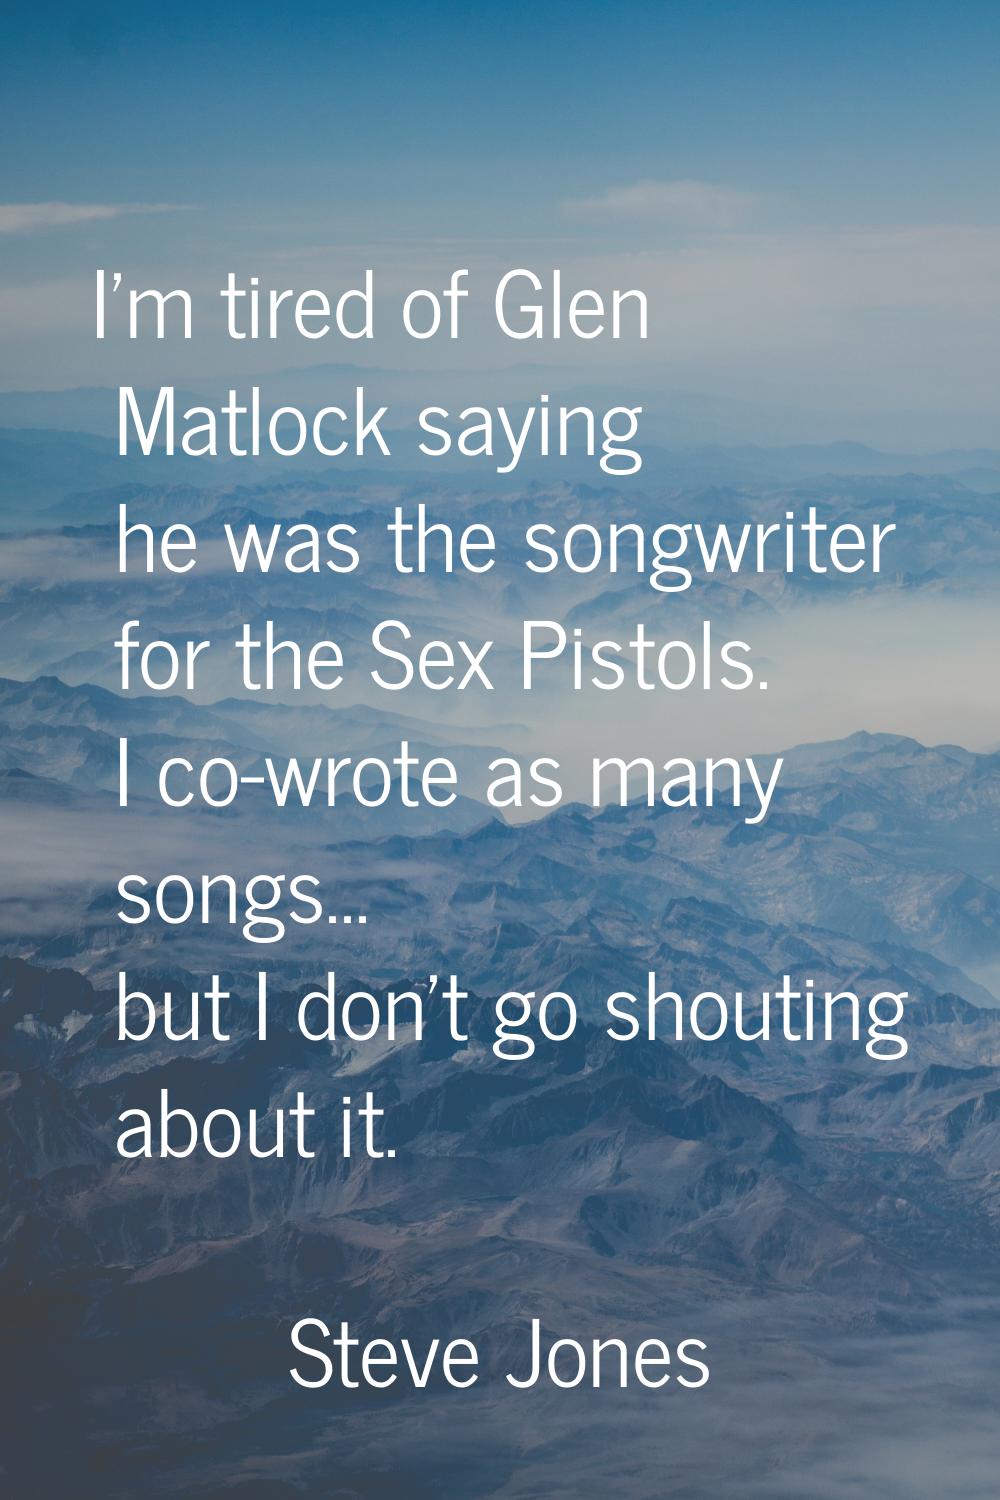 I'm tired of Glen Matlock saying he was the songwriter for the Sex Pistols. I co-wrote as many song